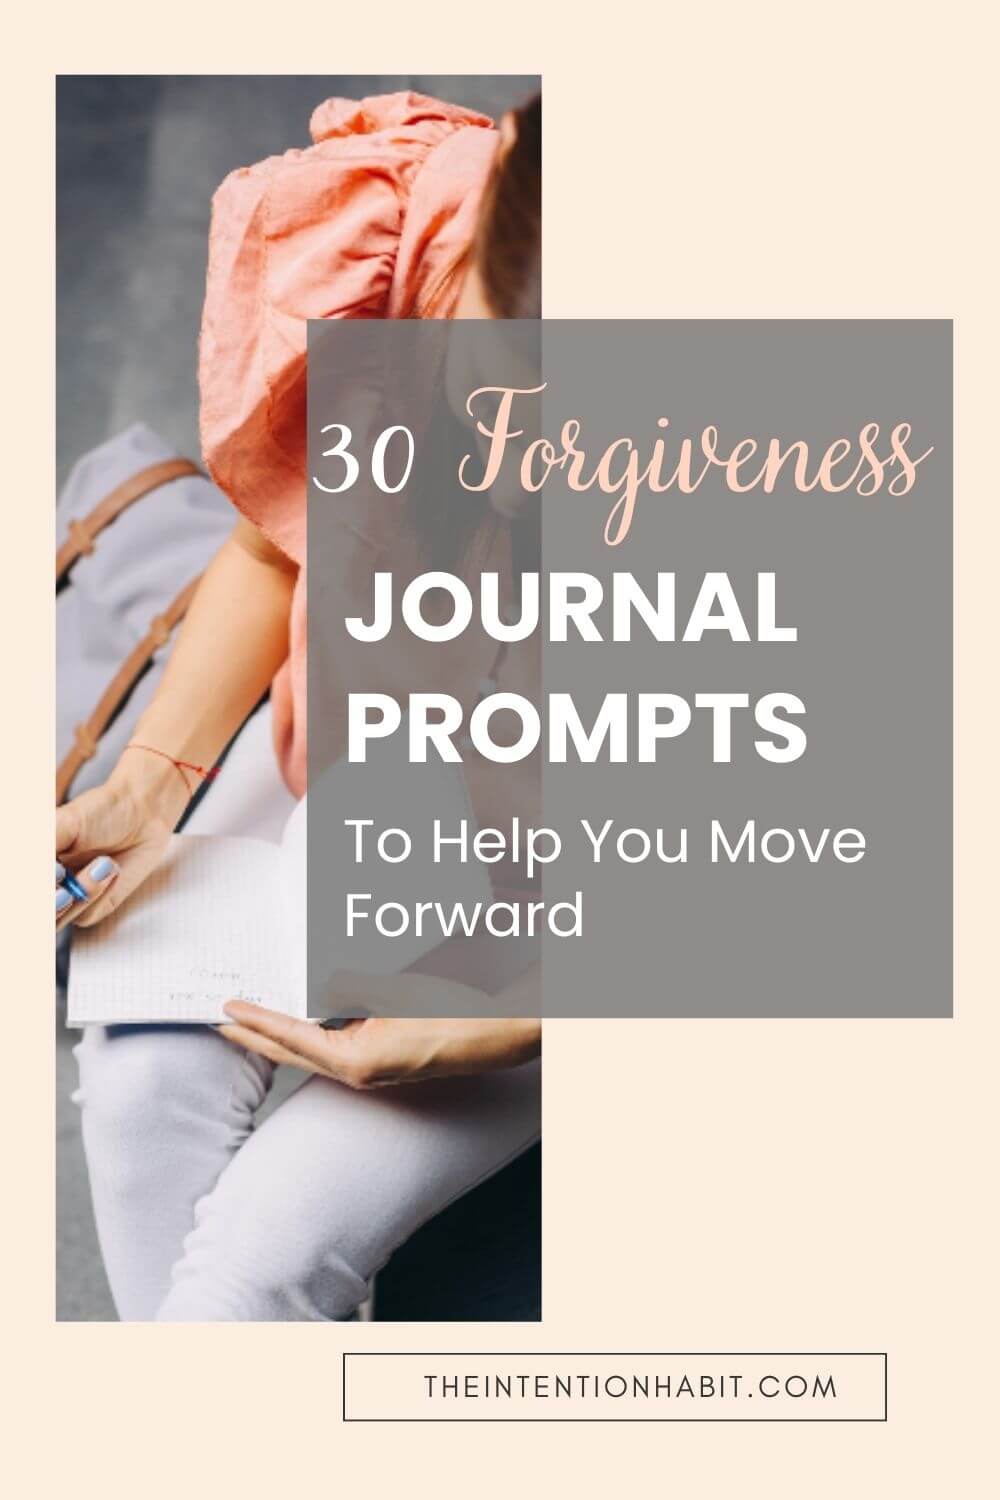 30 forgiveness journal prompts to help you move forward.